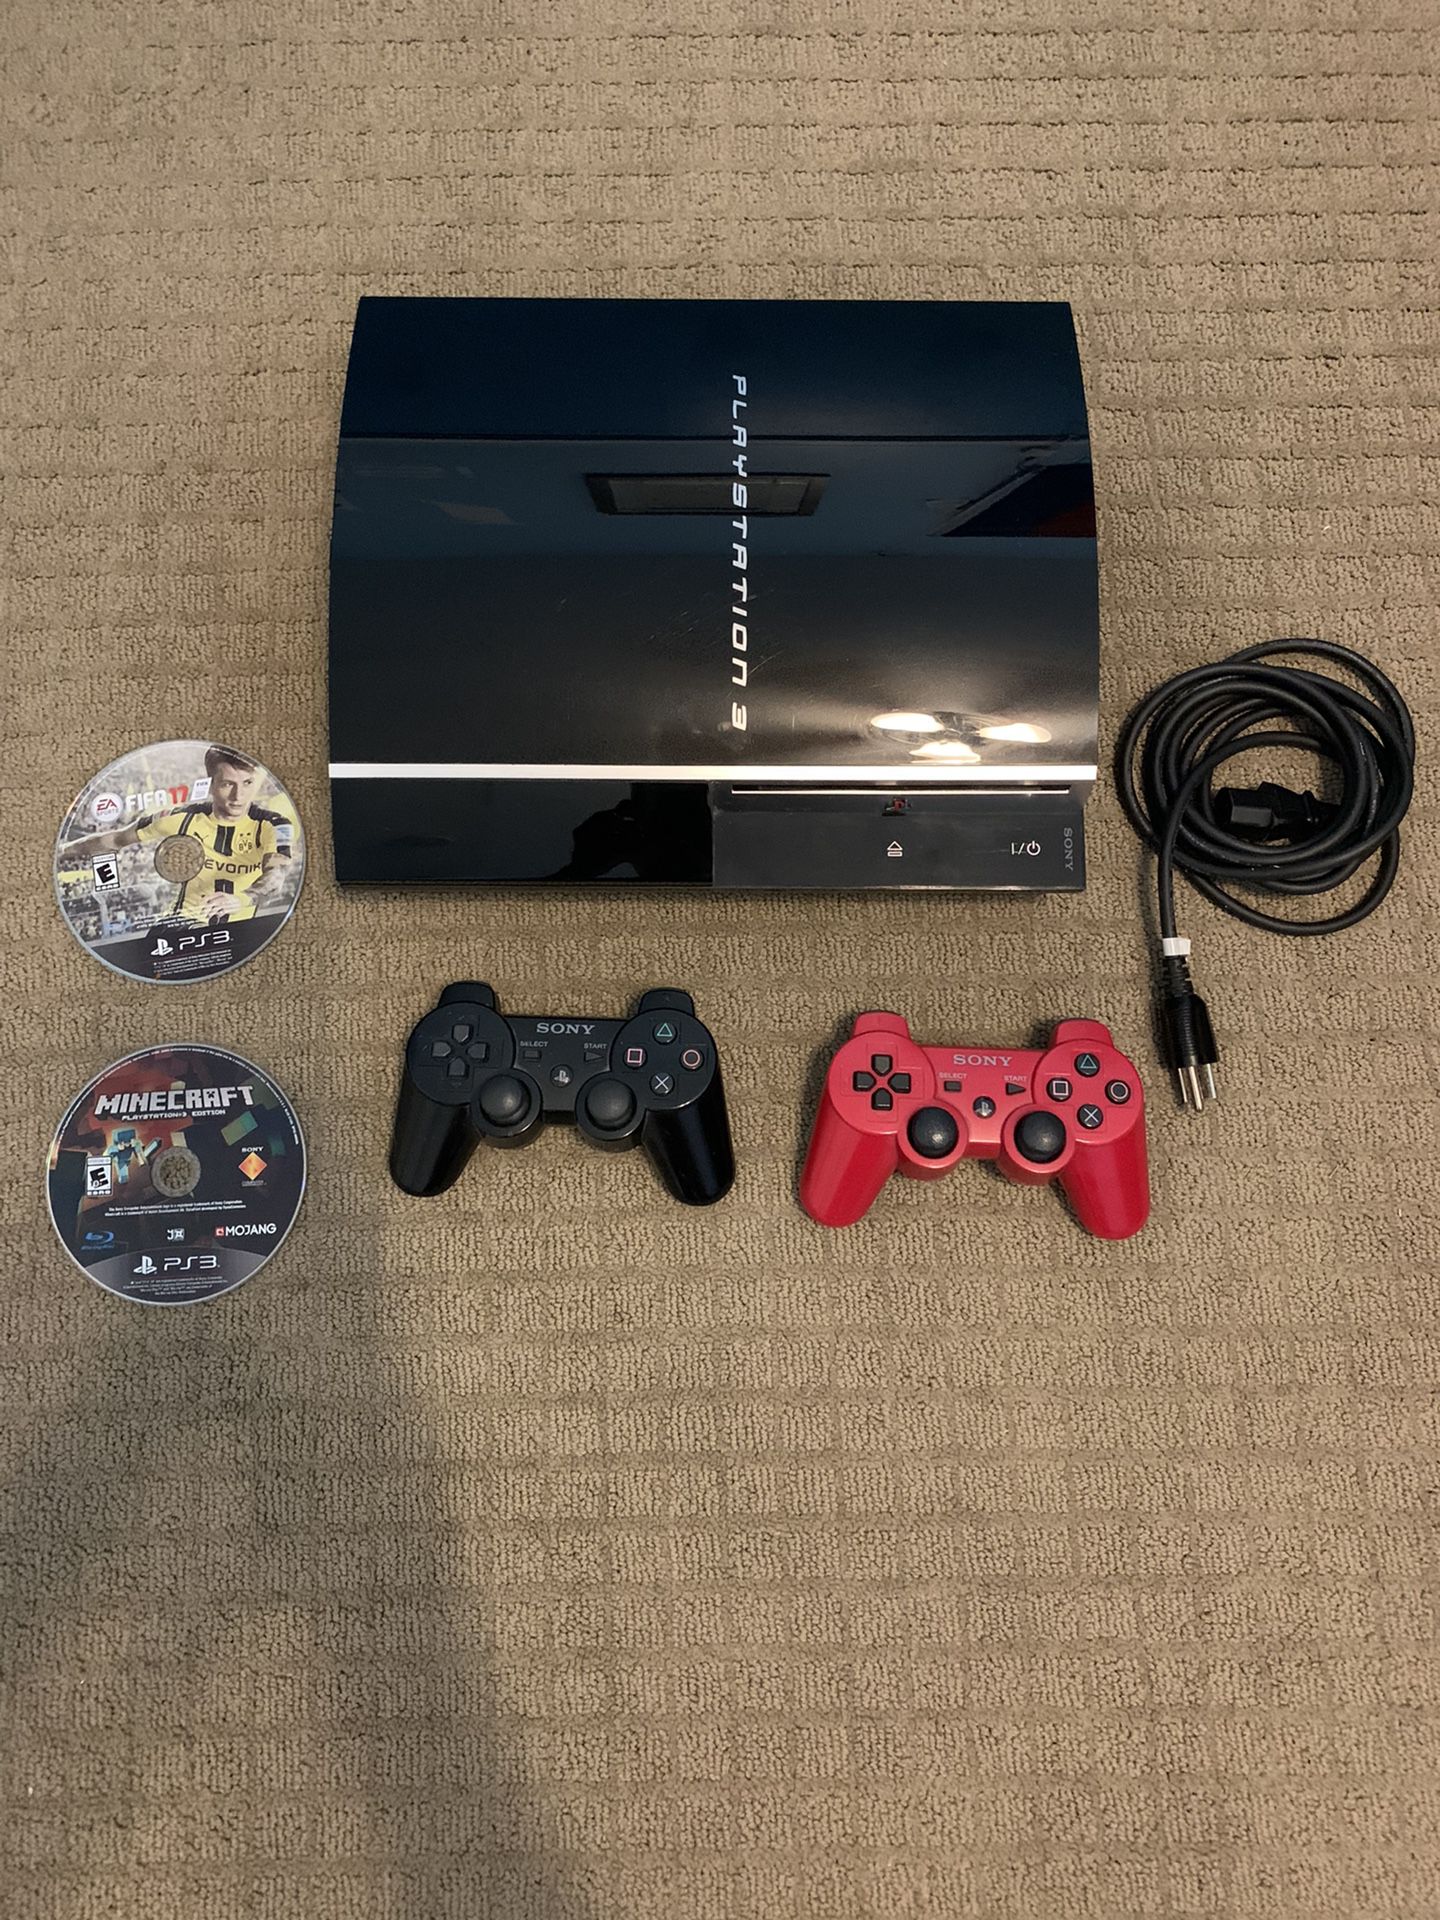  PS3 With 2 Controllers And 2 Games All Working 